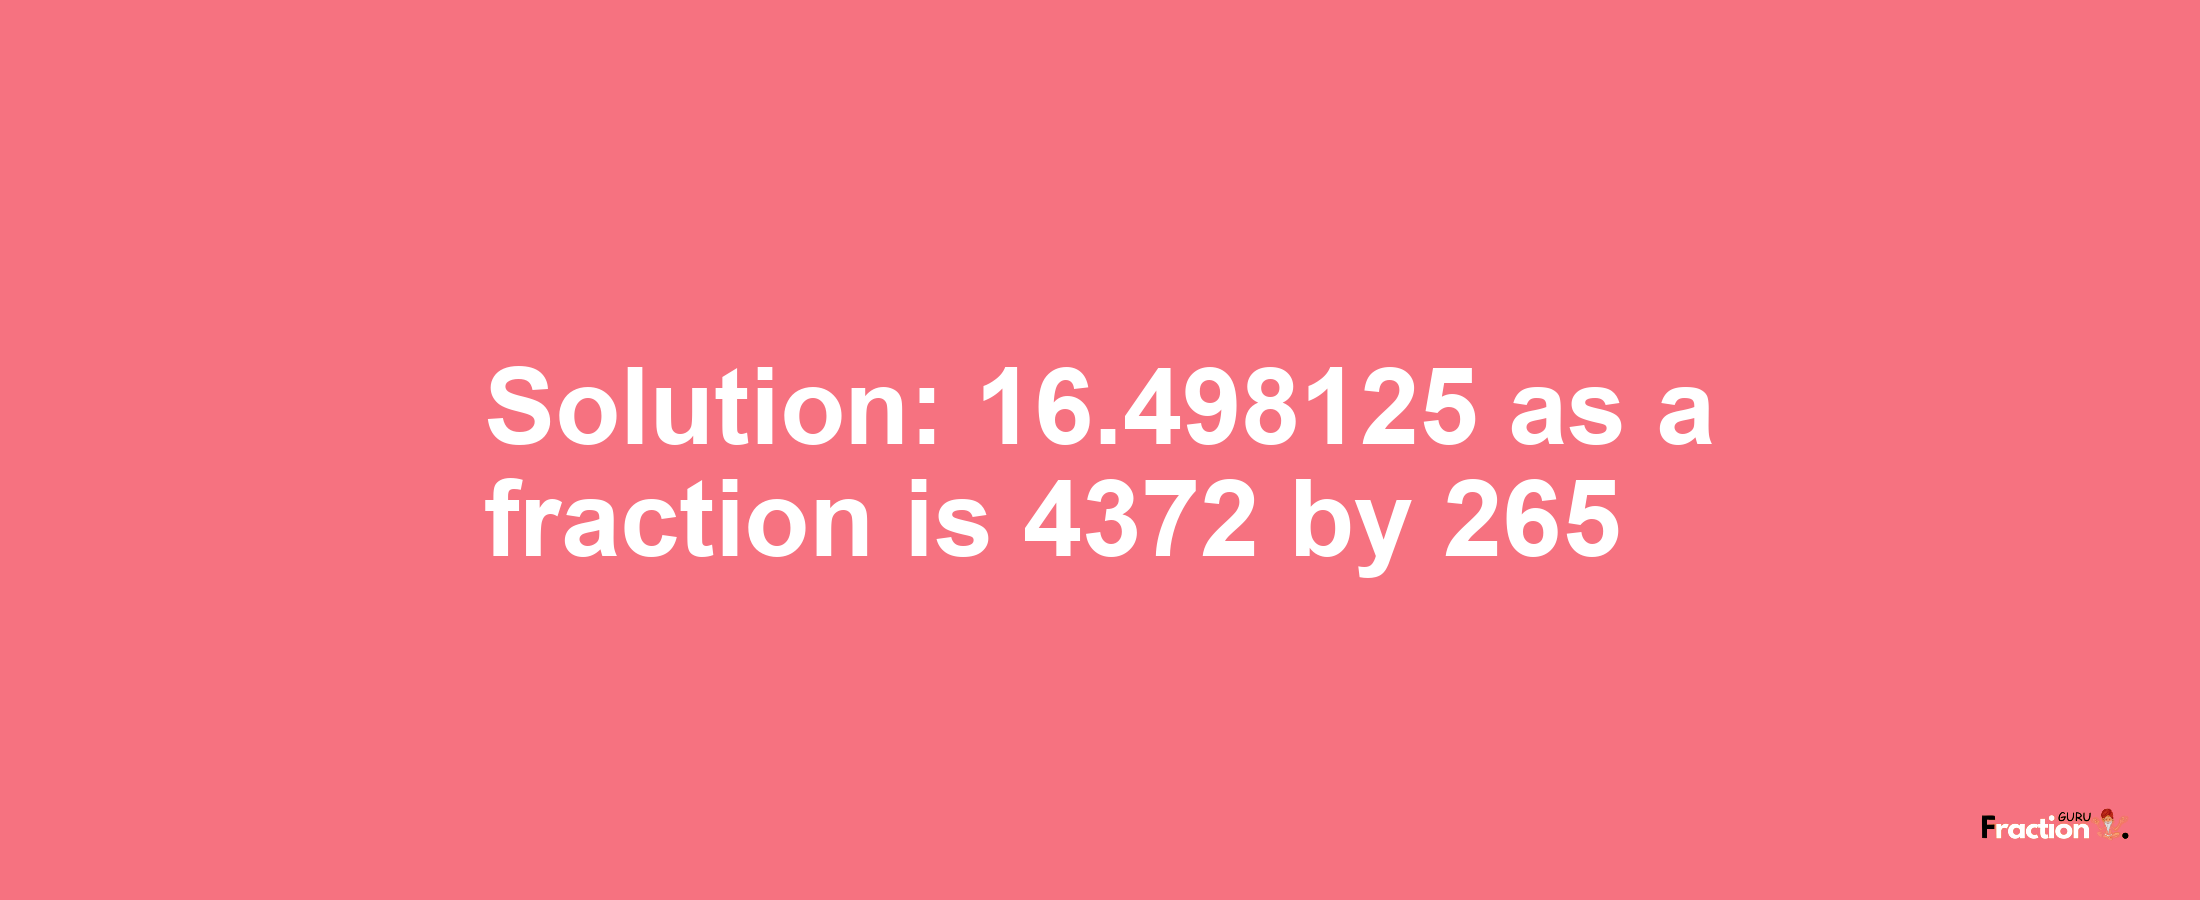 Solution:16.498125 as a fraction is 4372/265